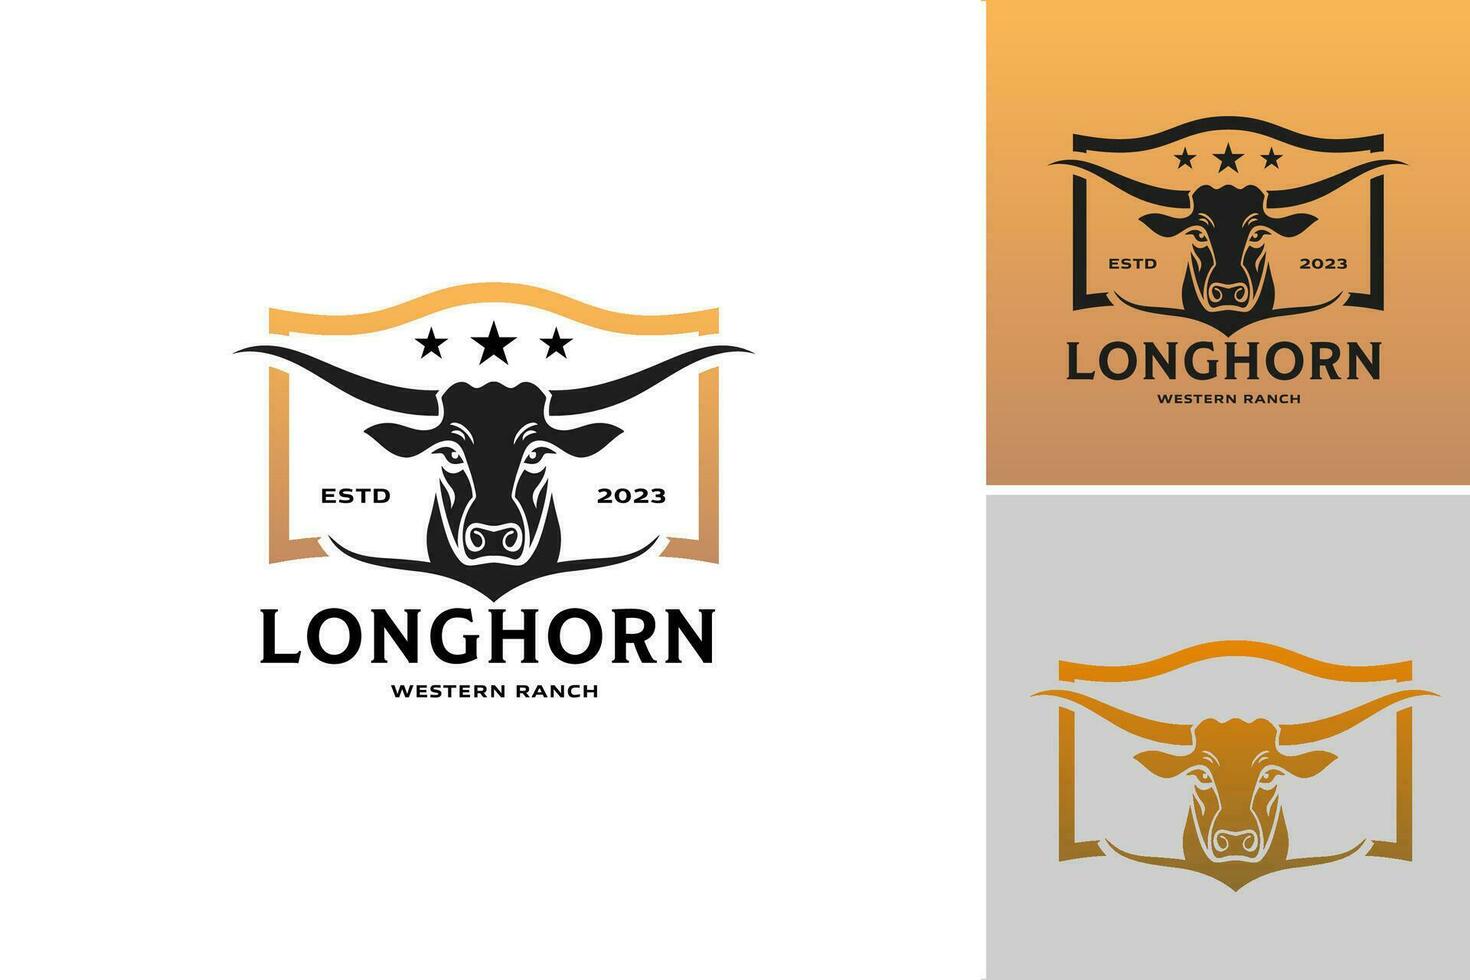 Longhorn Western Ranch Logo is a design asset that depicts a logo inspired by the Western theme, vector